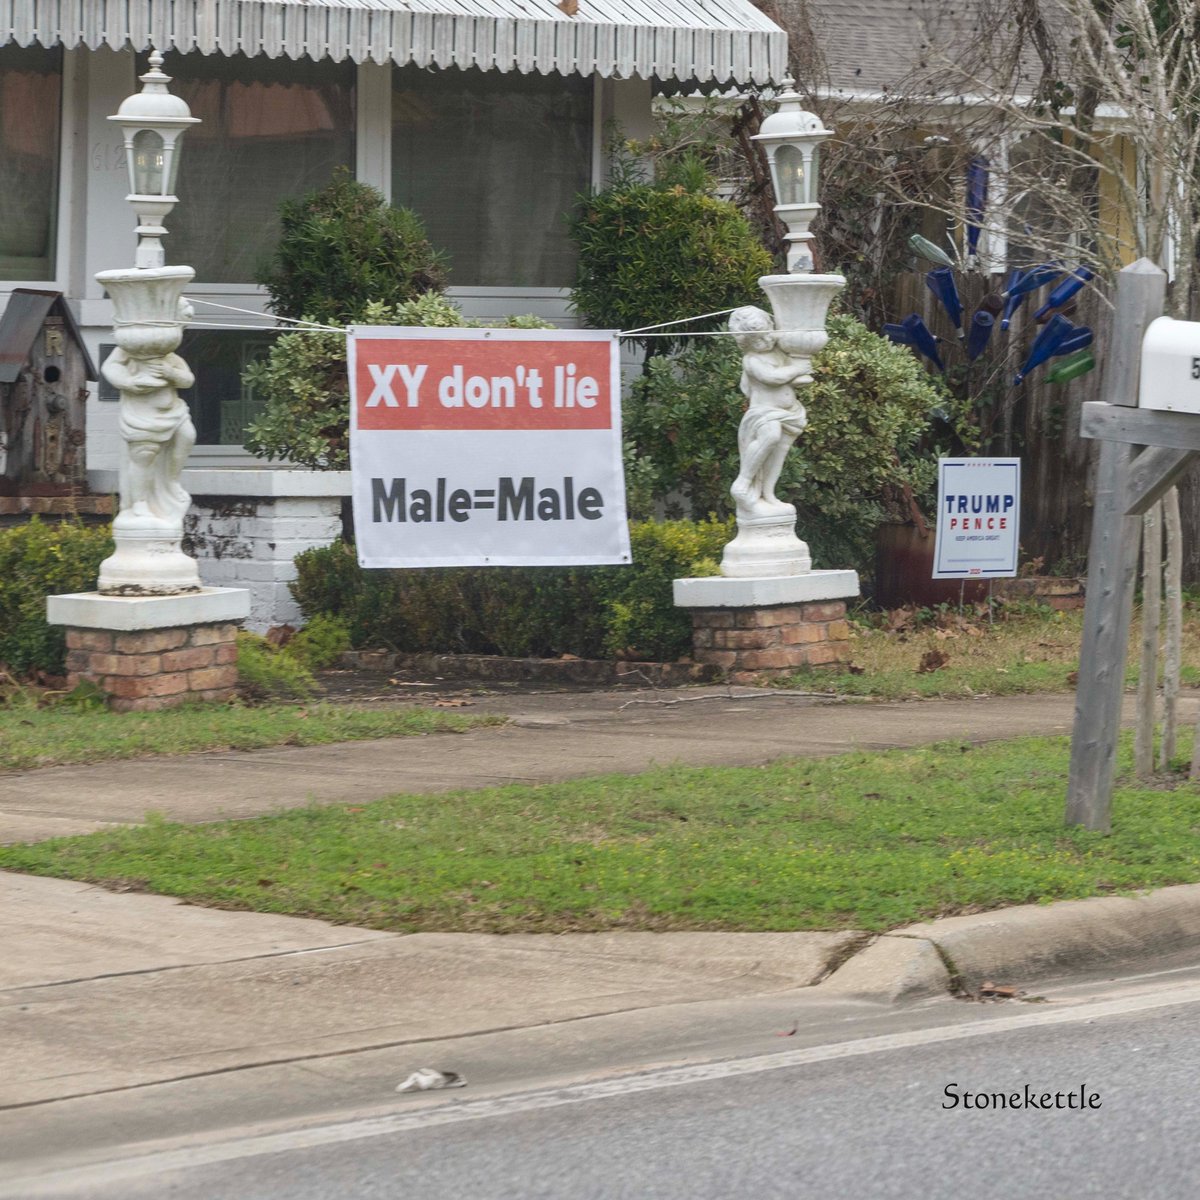 Milton, Florida. Hick, backwater (literally), Southern town. This guy is mad about trans people. Last week the sign said "Biden Stole It!" But this week, it's trans folk. And he's mad enough to put up this sign in his front yard. 1/